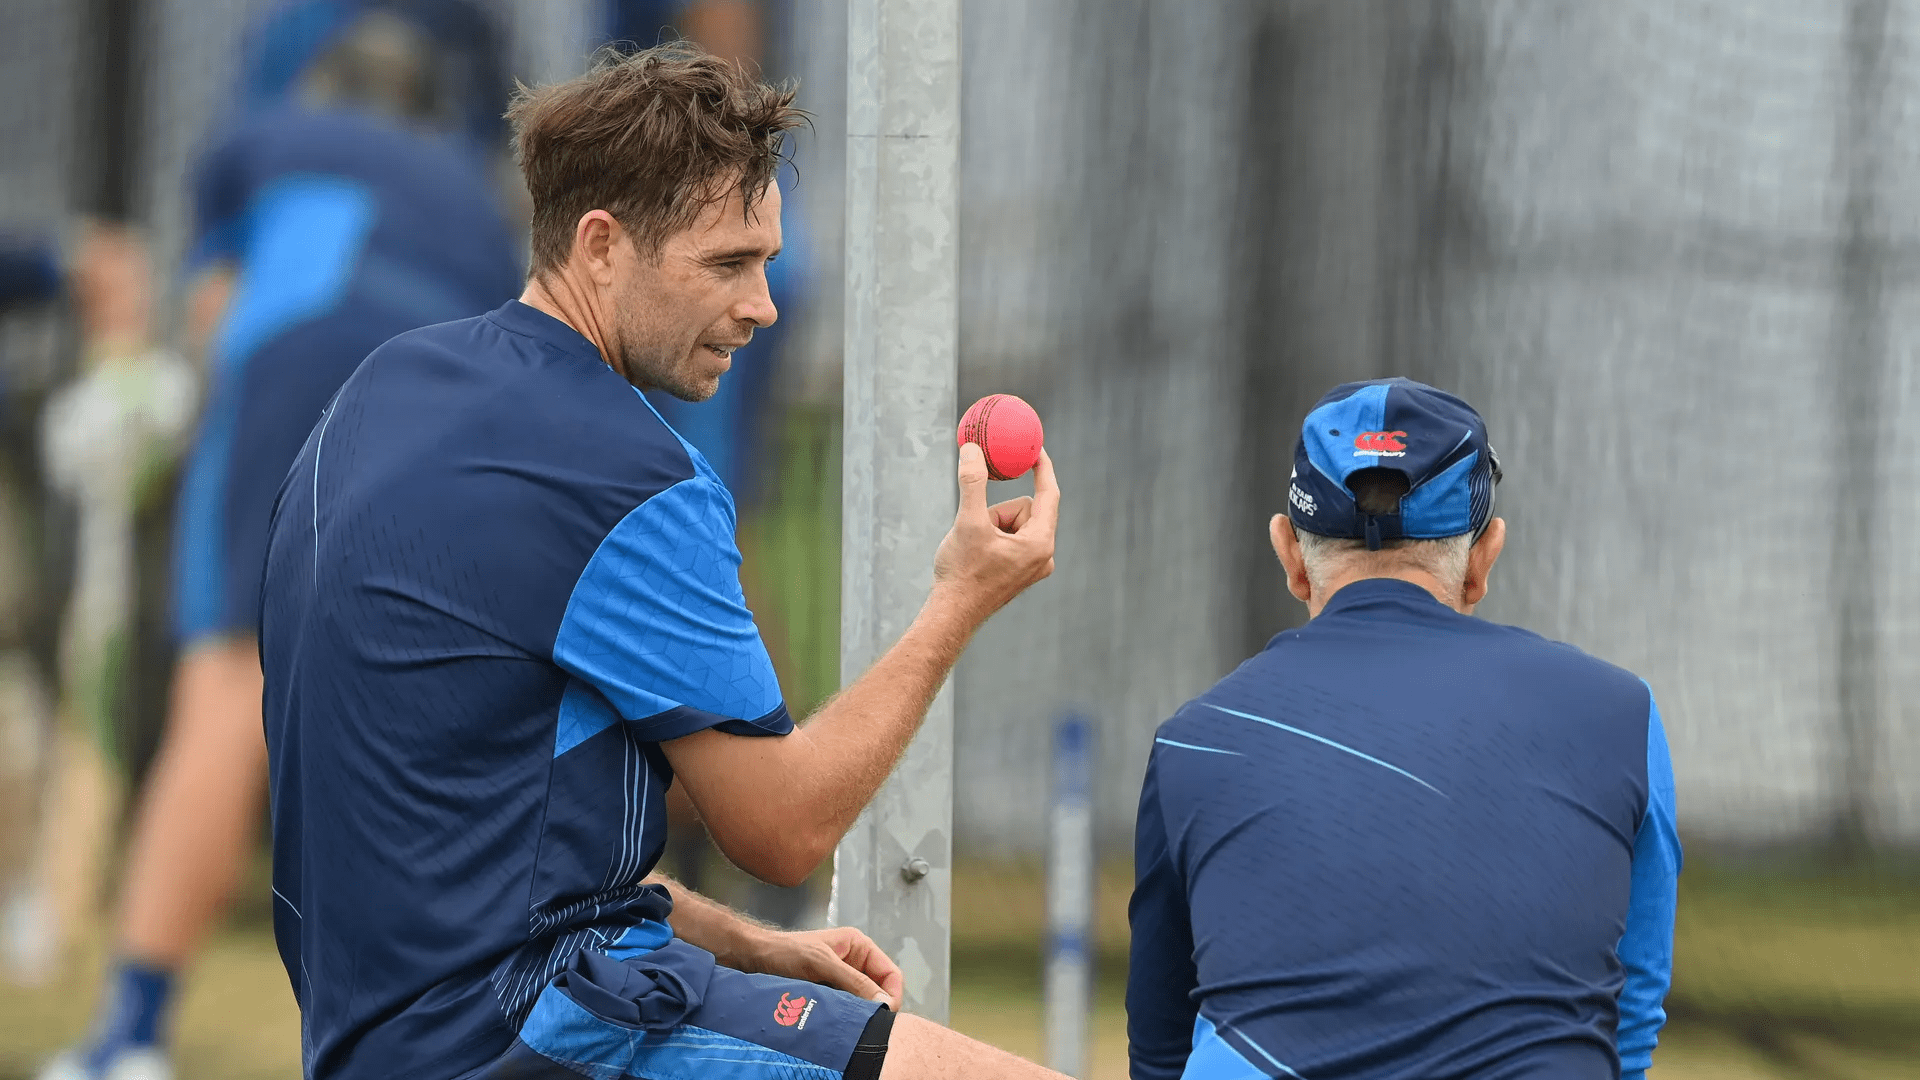 New Zealand Test skipper Tim Southee regarded the longest format as the pinnacle of the game